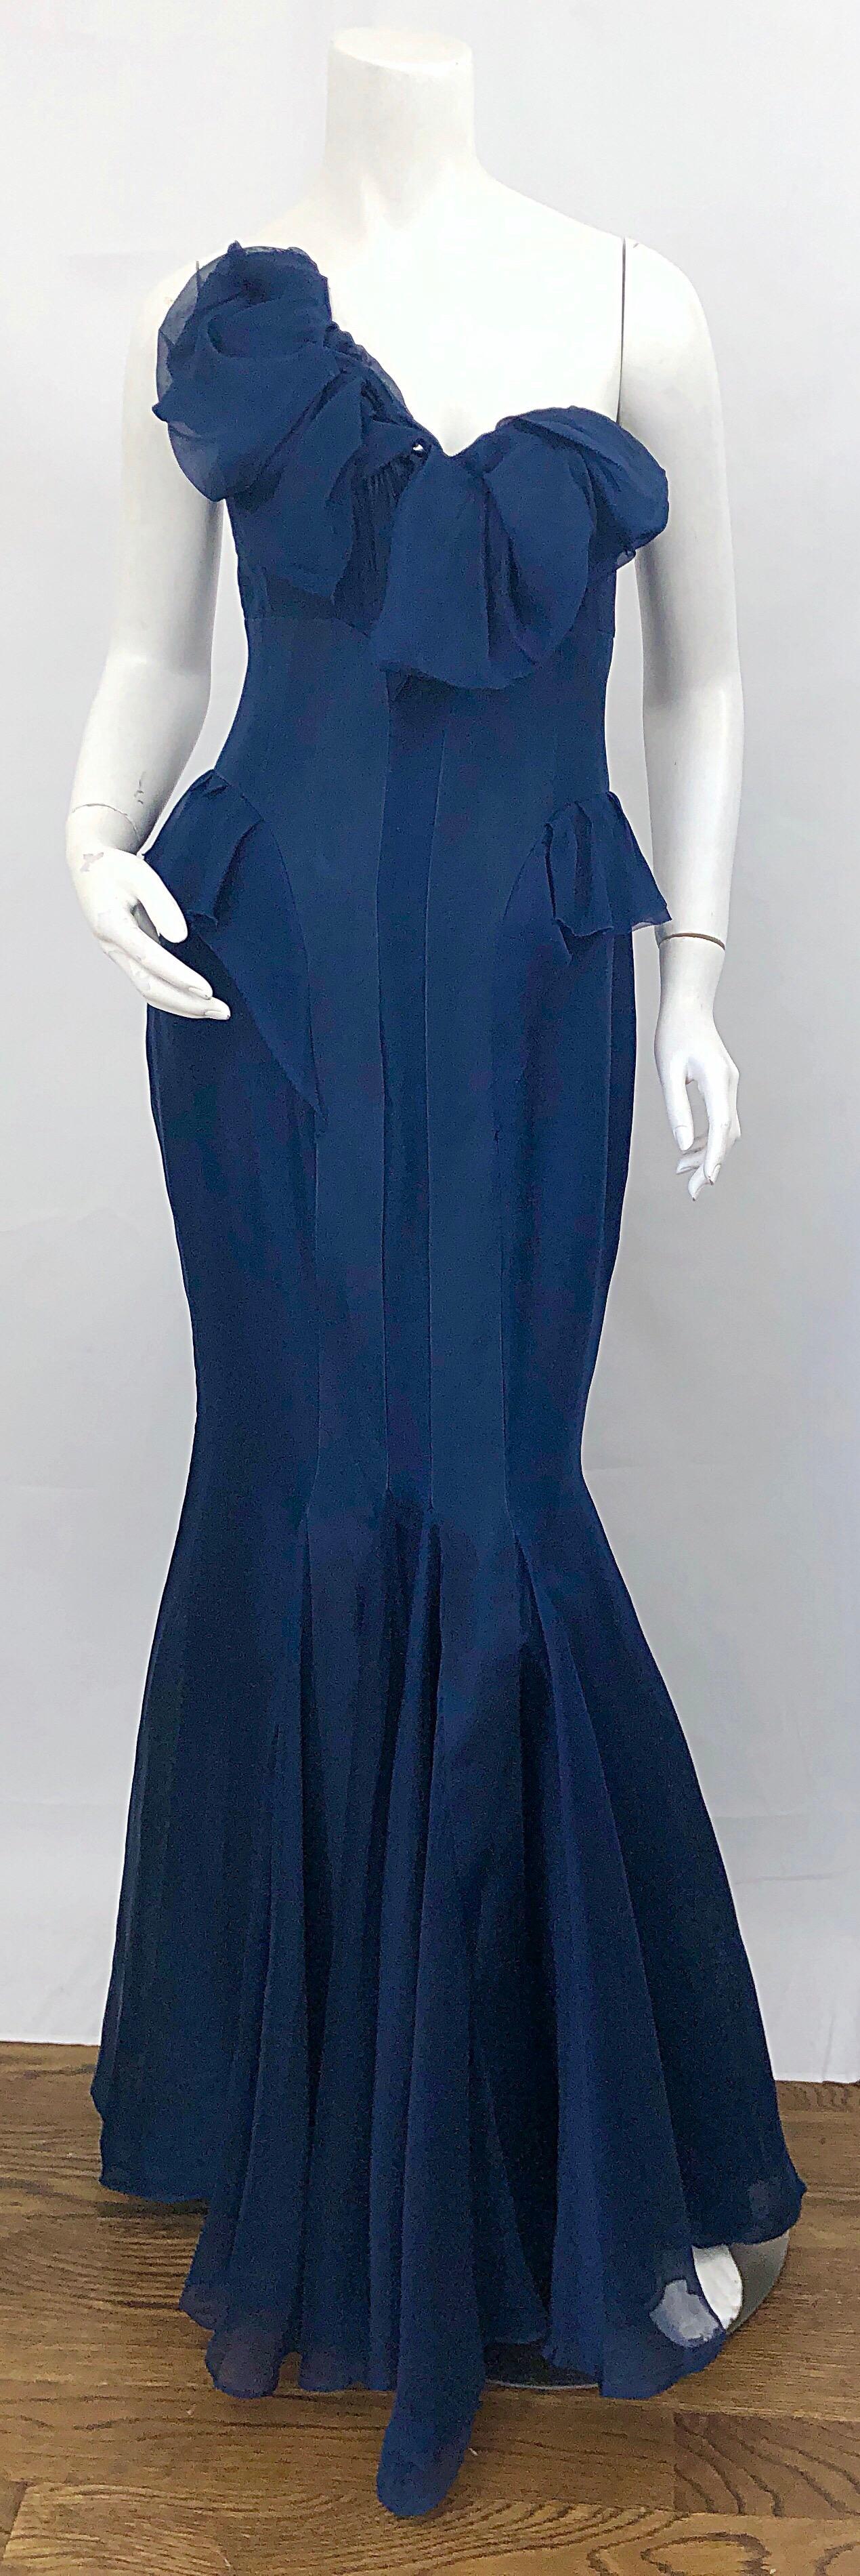 2000s J. Mendel Couture Size 4 Navy Blue Silk Chiffon One Shoulder Mermaid Gown  For Sale 6